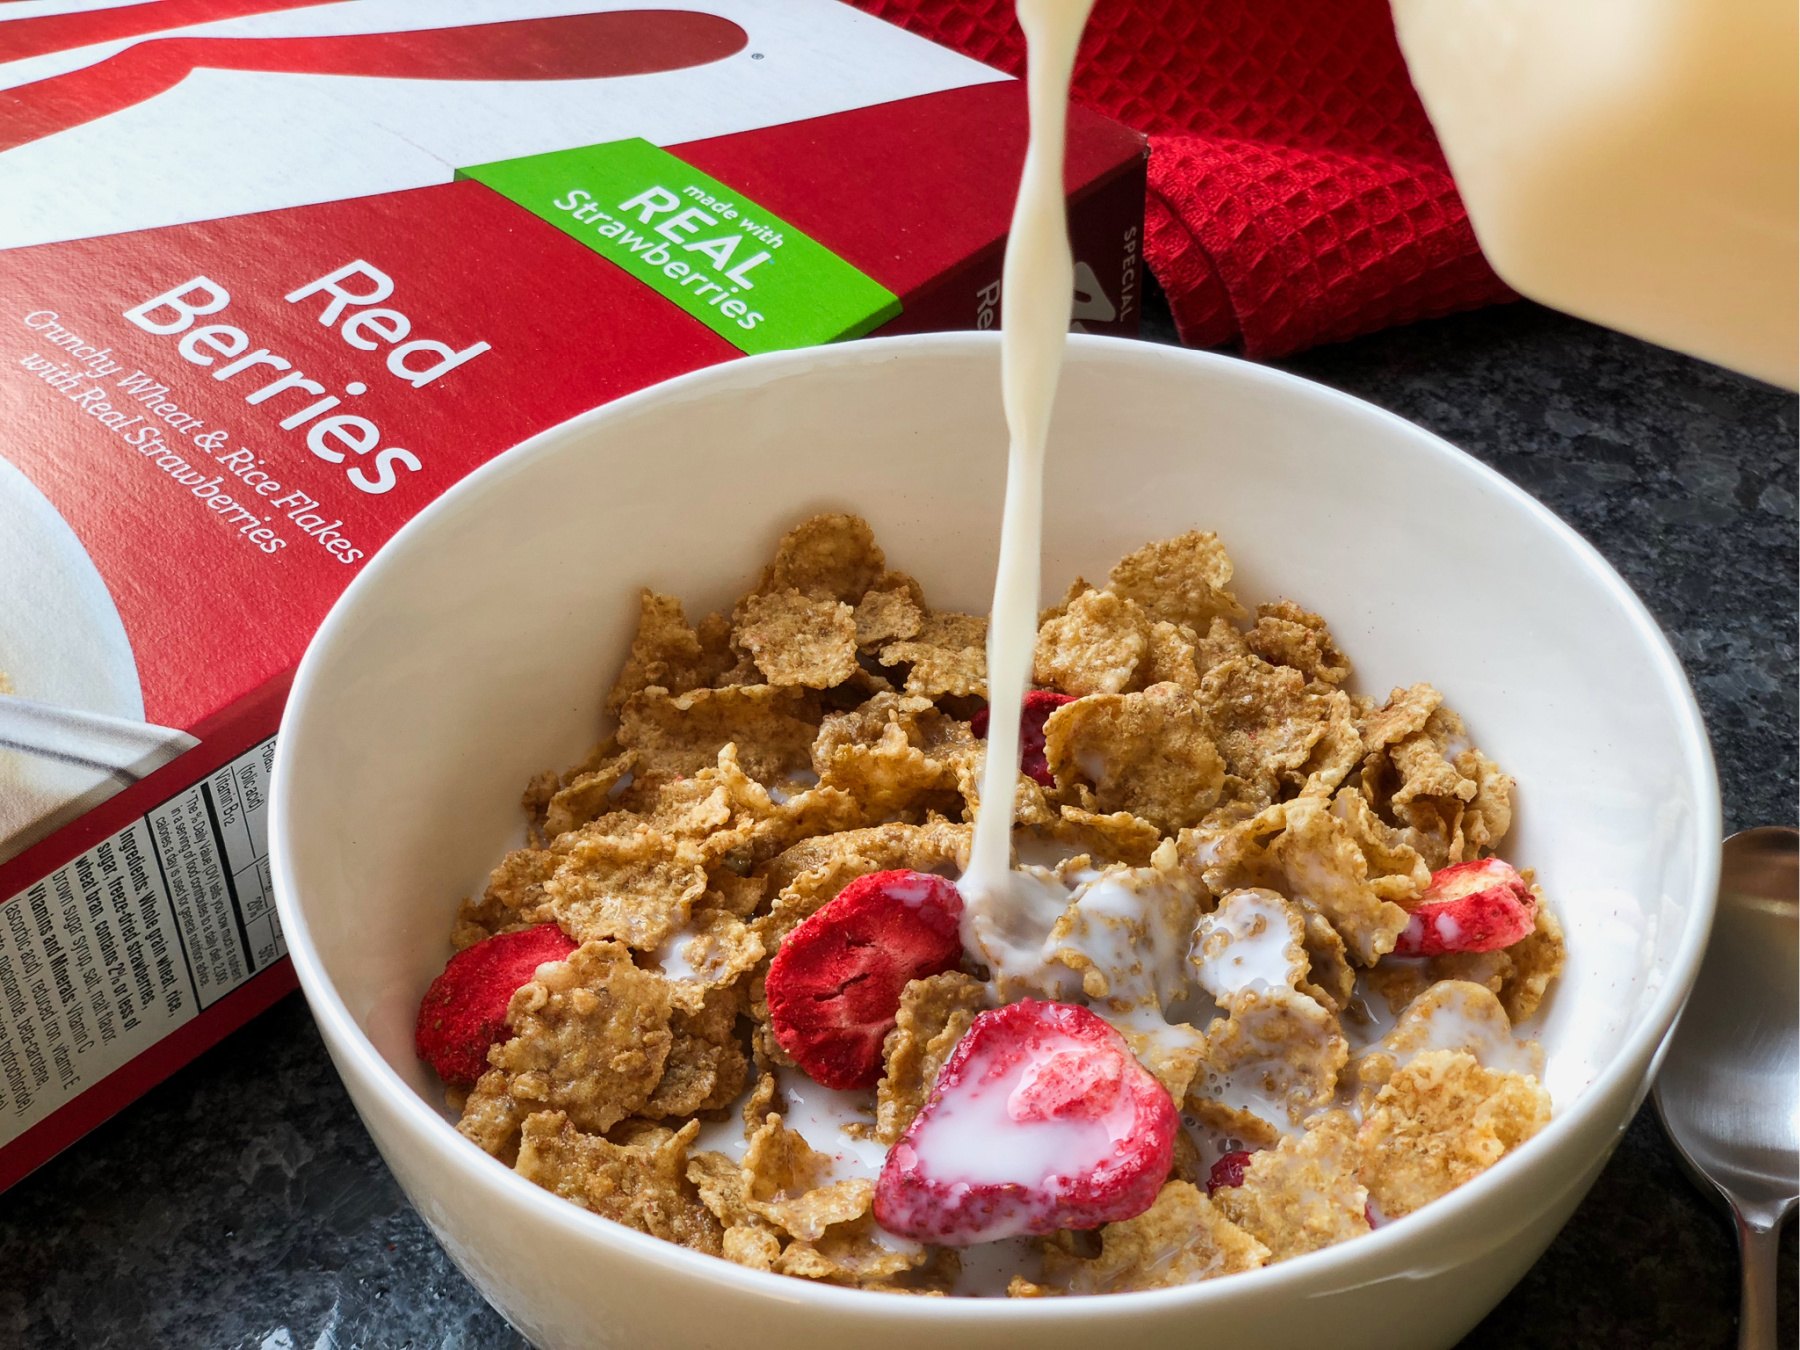 Pick Up Kellogg’s® Special K® Cereals During The Publix BOGO Sale (As Low As 90¢) & Sign Up For The Susan G. Komen Miami/Fort Lauderdale Virtual More Thank Pink Walk on I Heart Publix